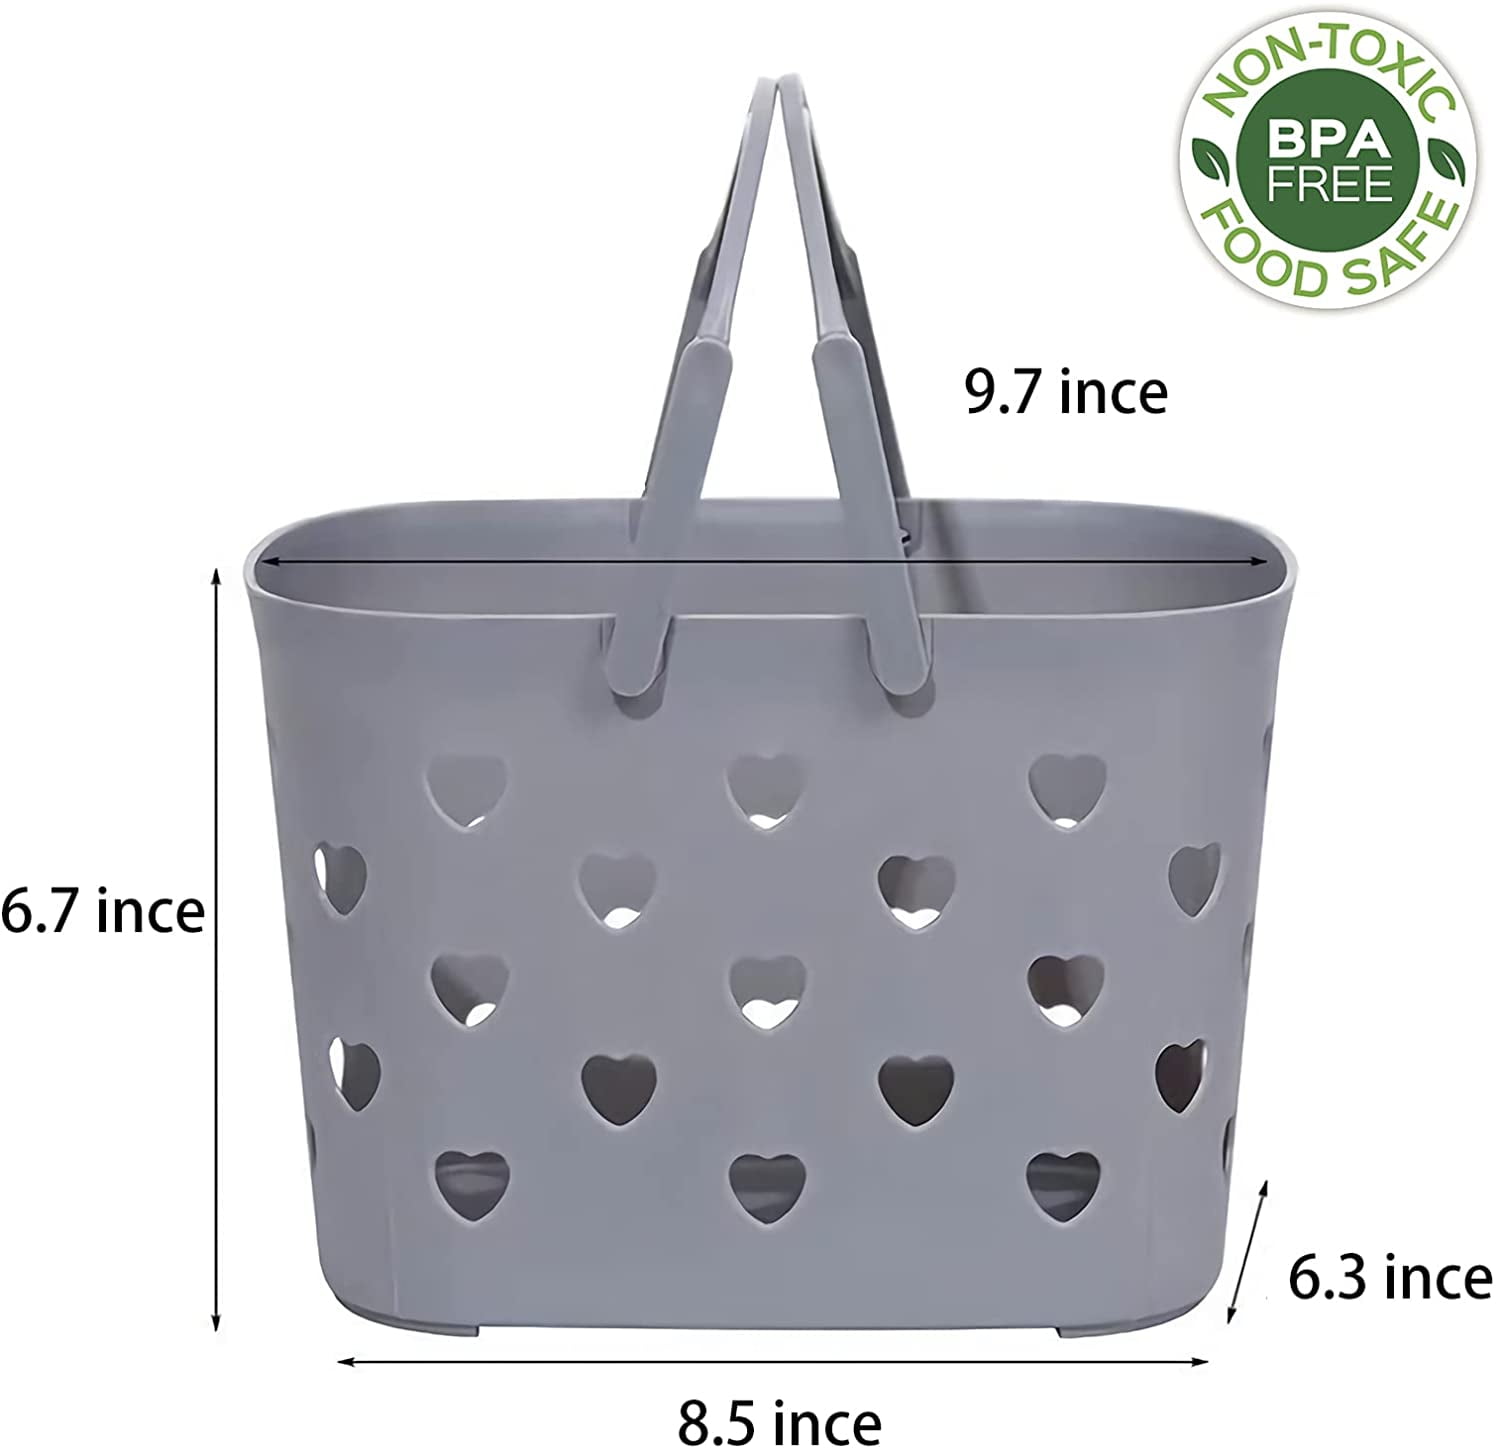 Anyoifax Portable Shower Caddy Tote Plastic Basket with Handle Storage Organizer Bin for Bathroom, Pantry, Kitchen, College Dorm, 12 x 7.